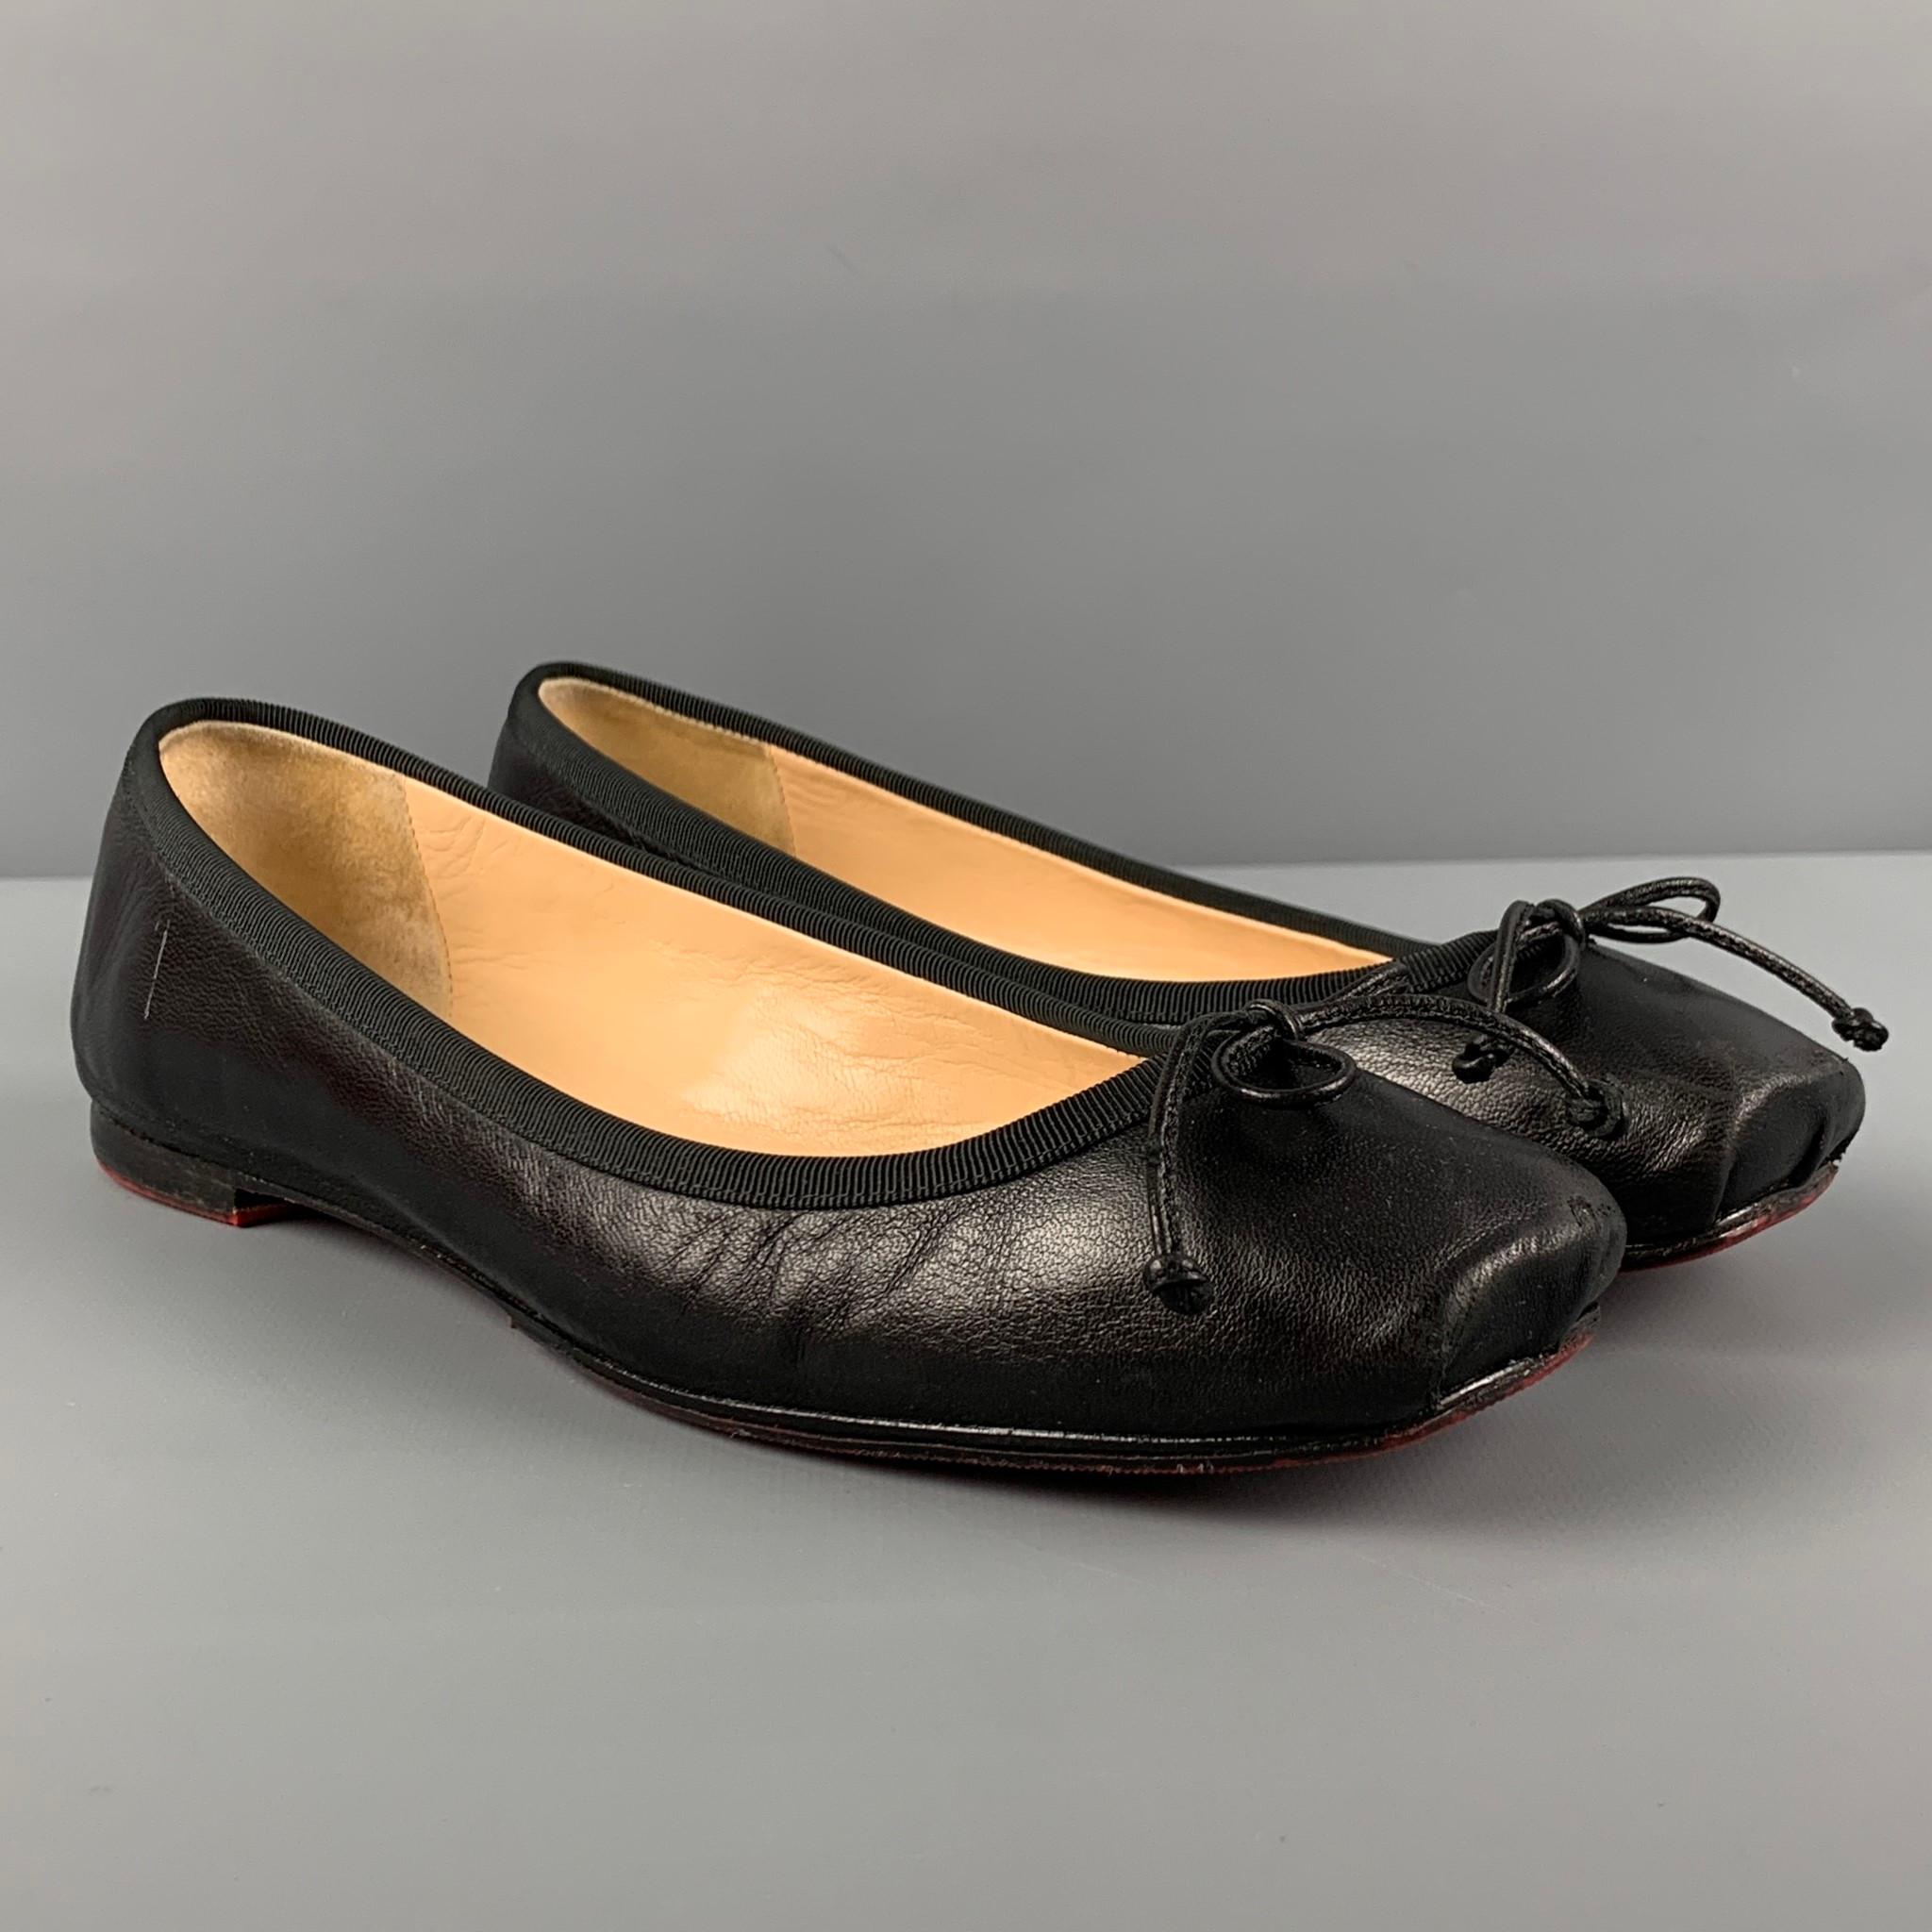 CHRISTIAN LOUBOUTIN 'Rosella' flats comes in a black leather featuring a ribbon trim, front bow detail, and signature red sole. Includes box. Made in Italy. 

Good Pre-Owned Condition. Minor wear. As-Is.
Marked: 37

Outsole: 9.5 in. x 3 in. 